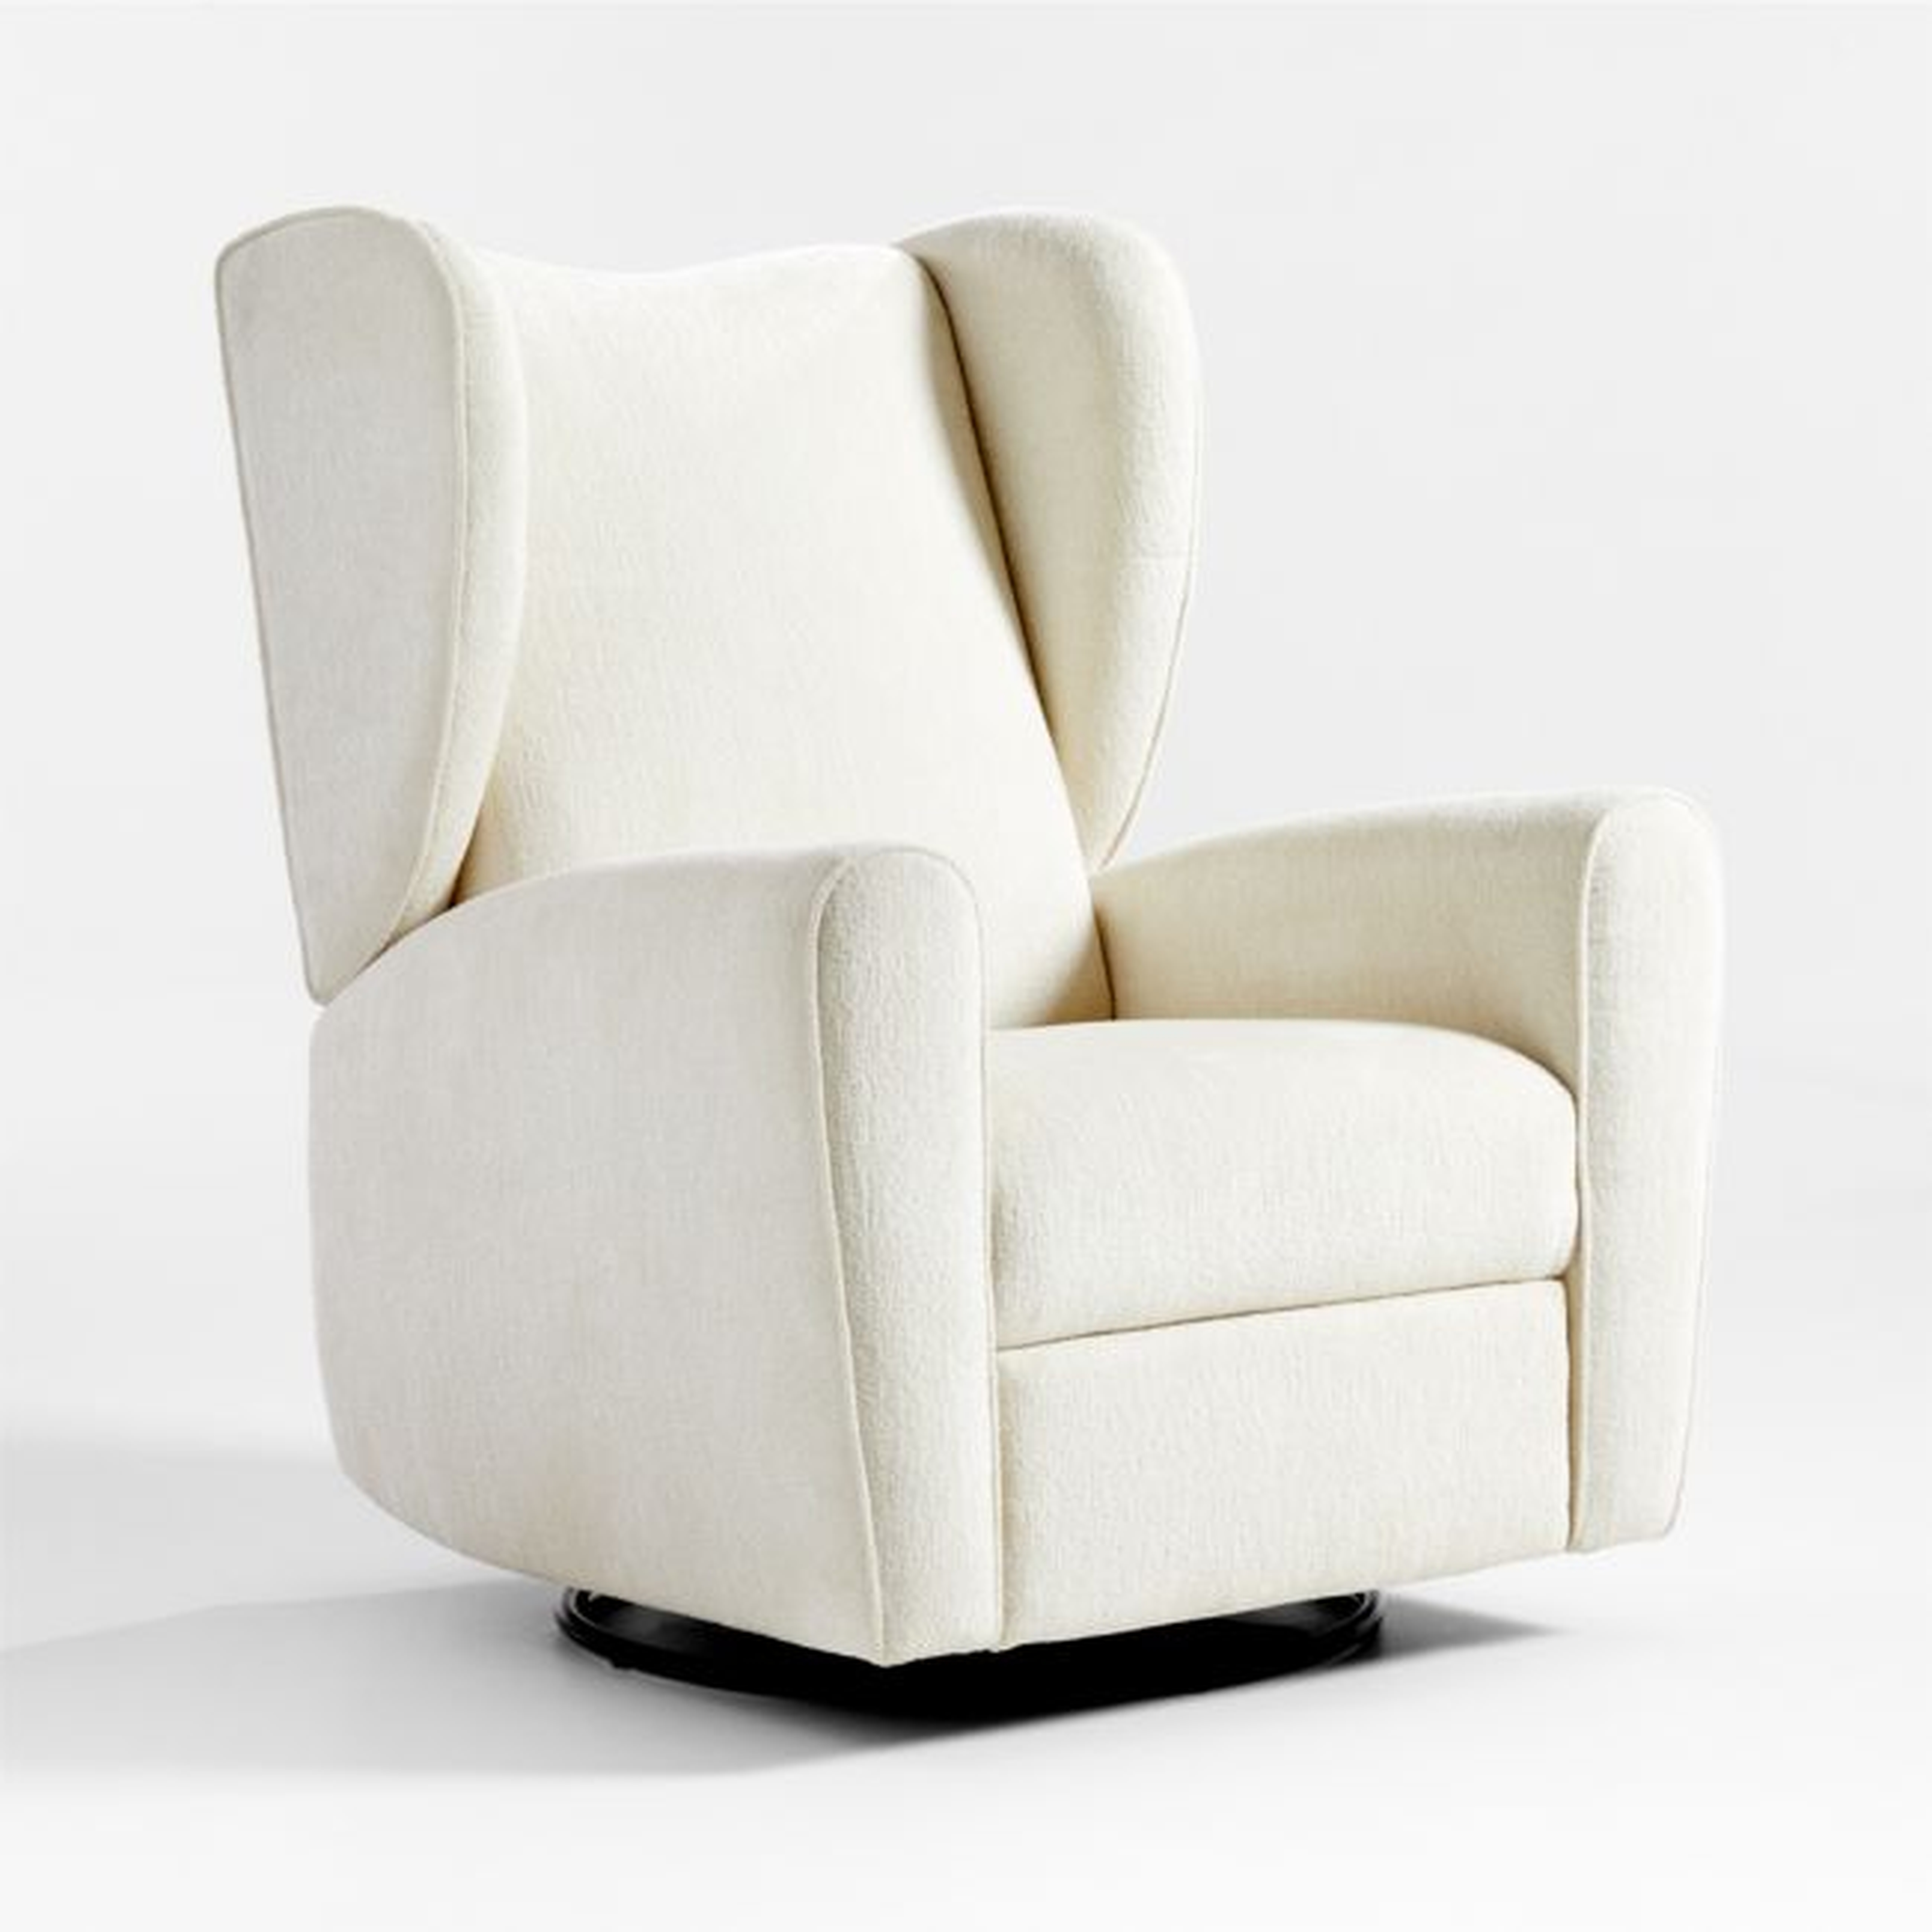 Seesaw Cream Power Recliner Chair - Crate and Barrel